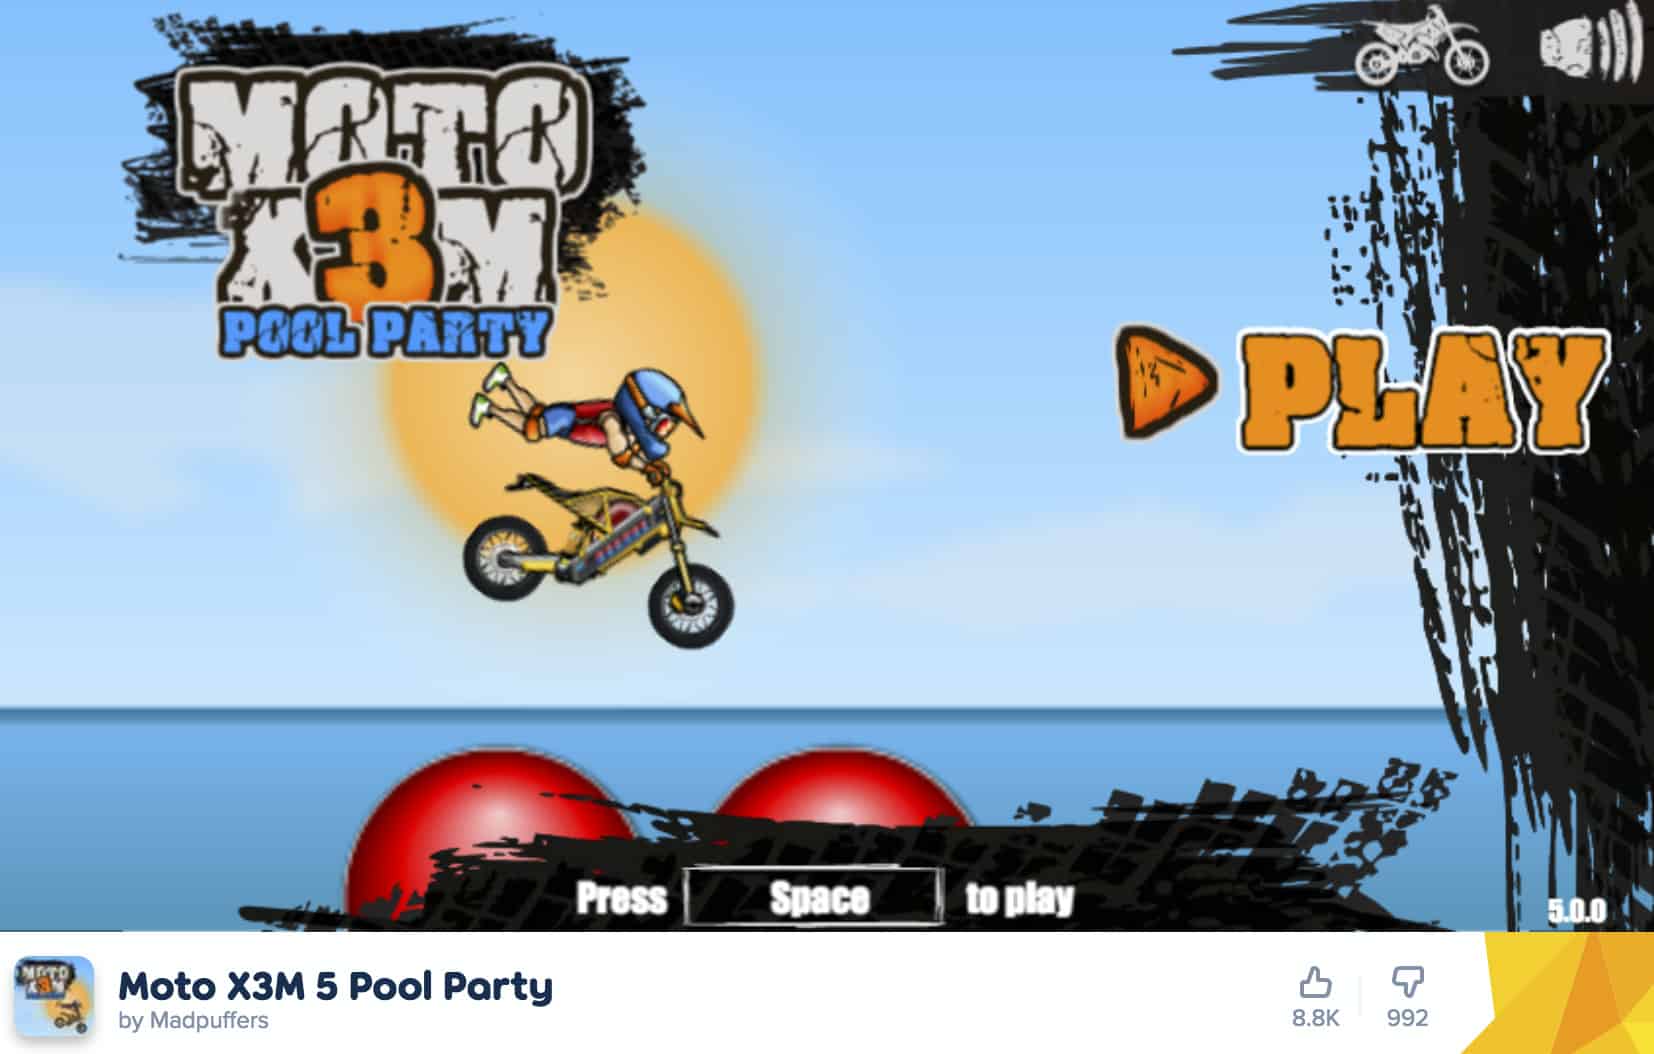 Moto X3M 5: Pool Party - Ultimate Waterlogged Motorcycle Madness